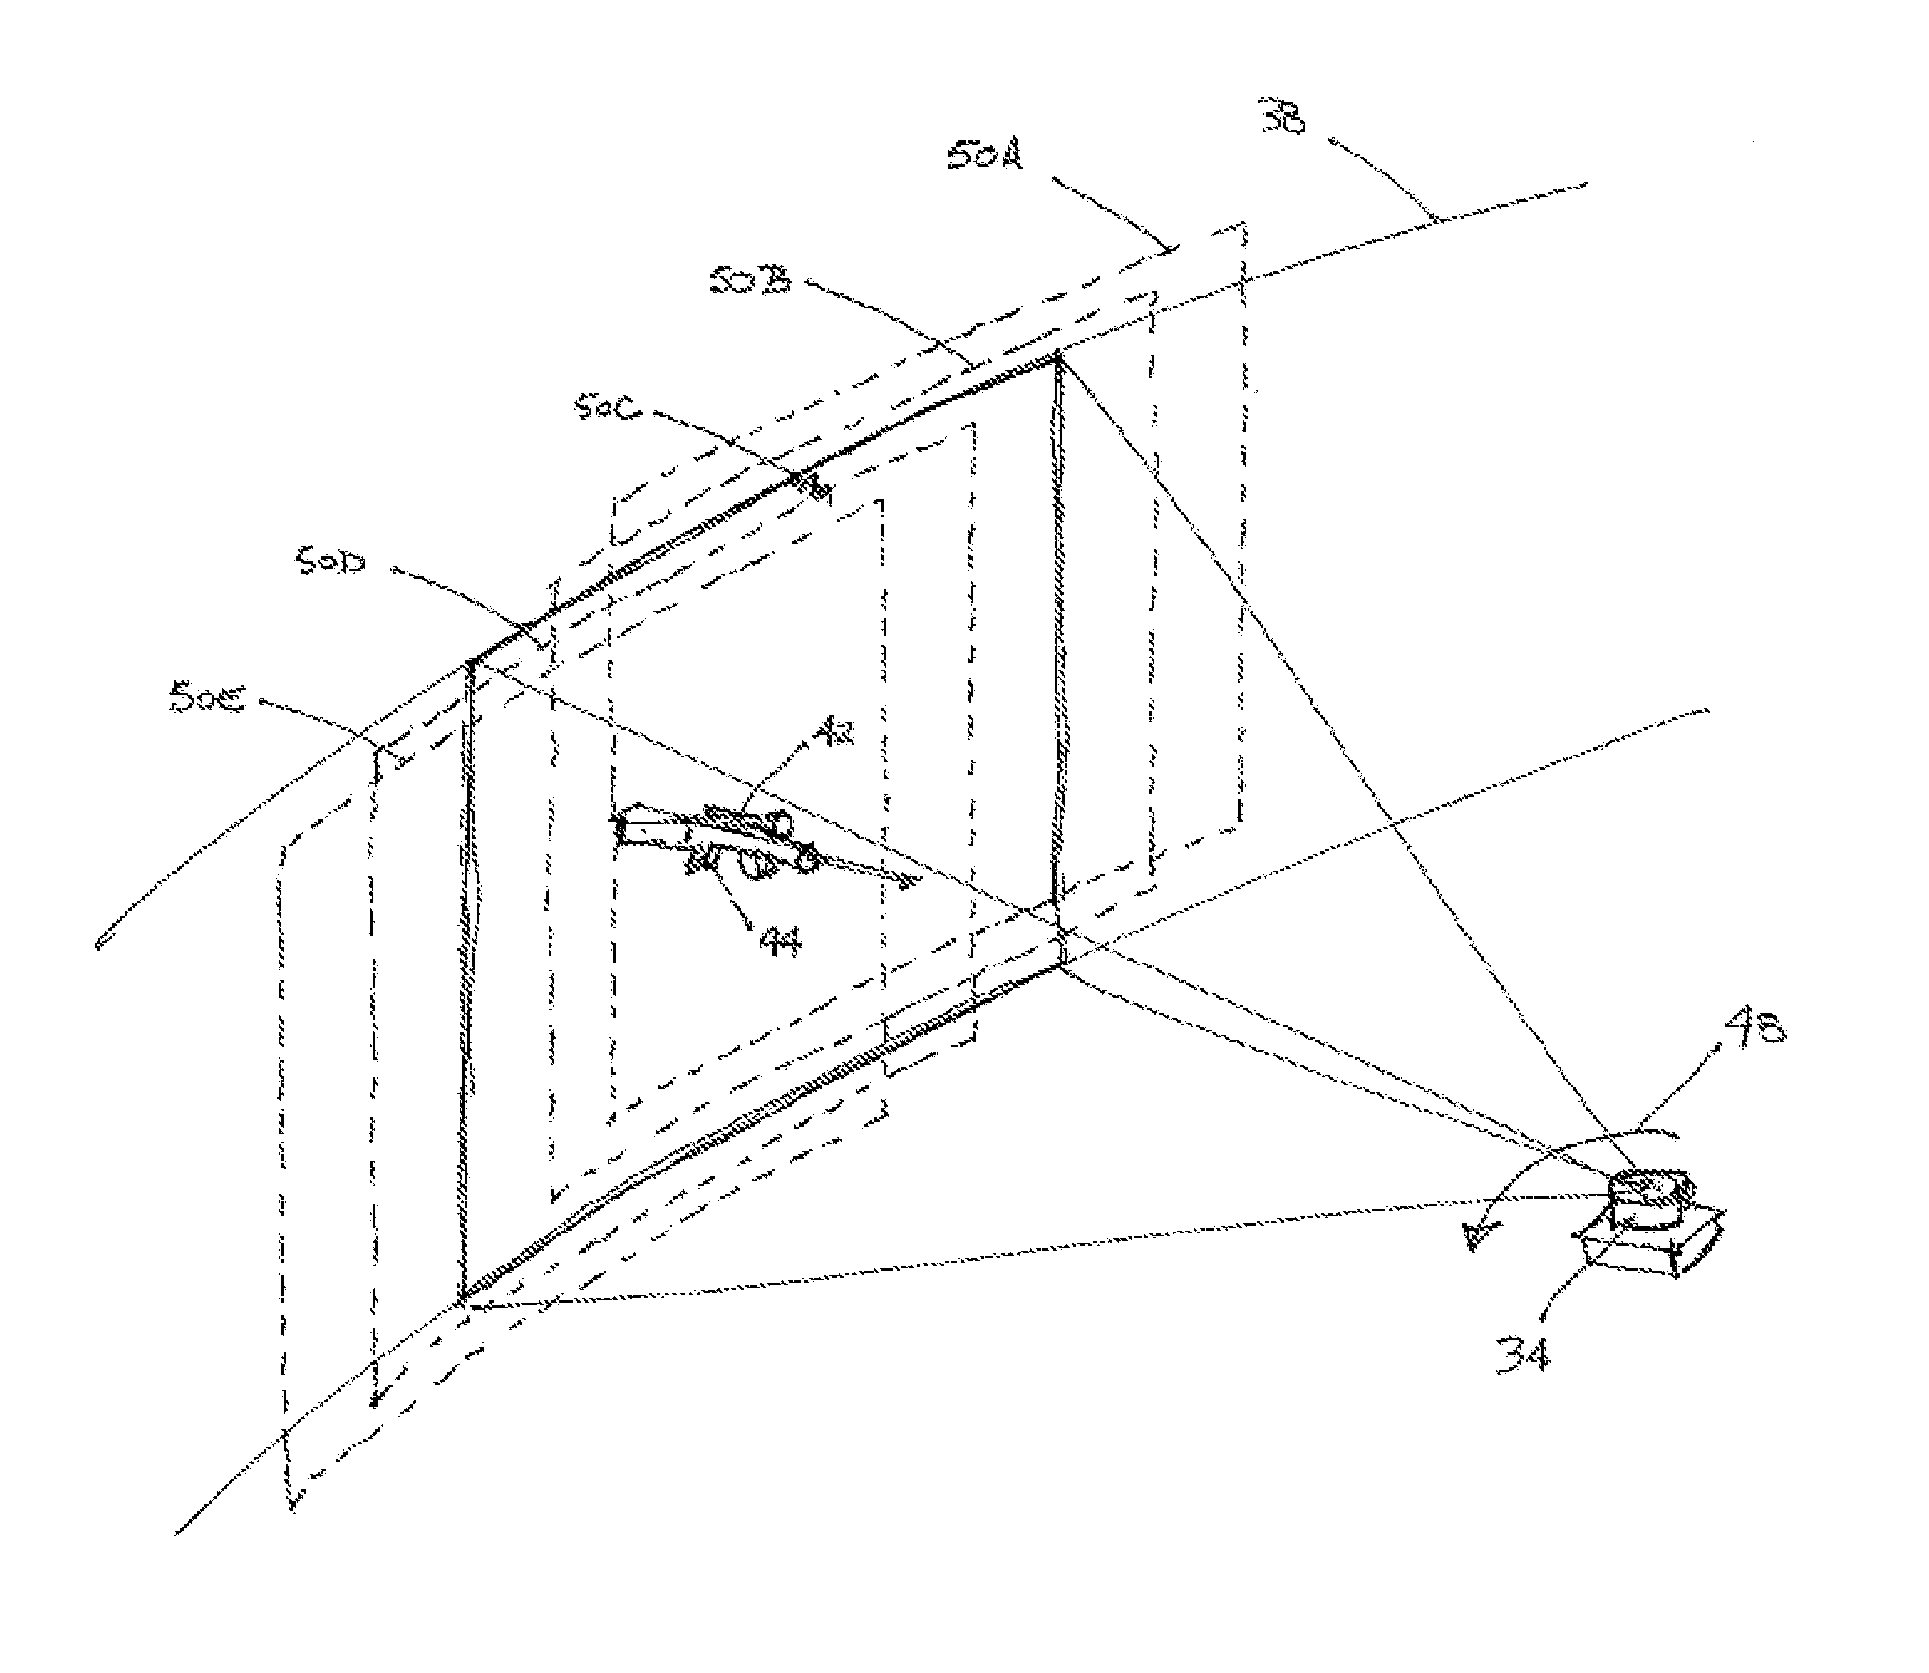 System and method for optics detection